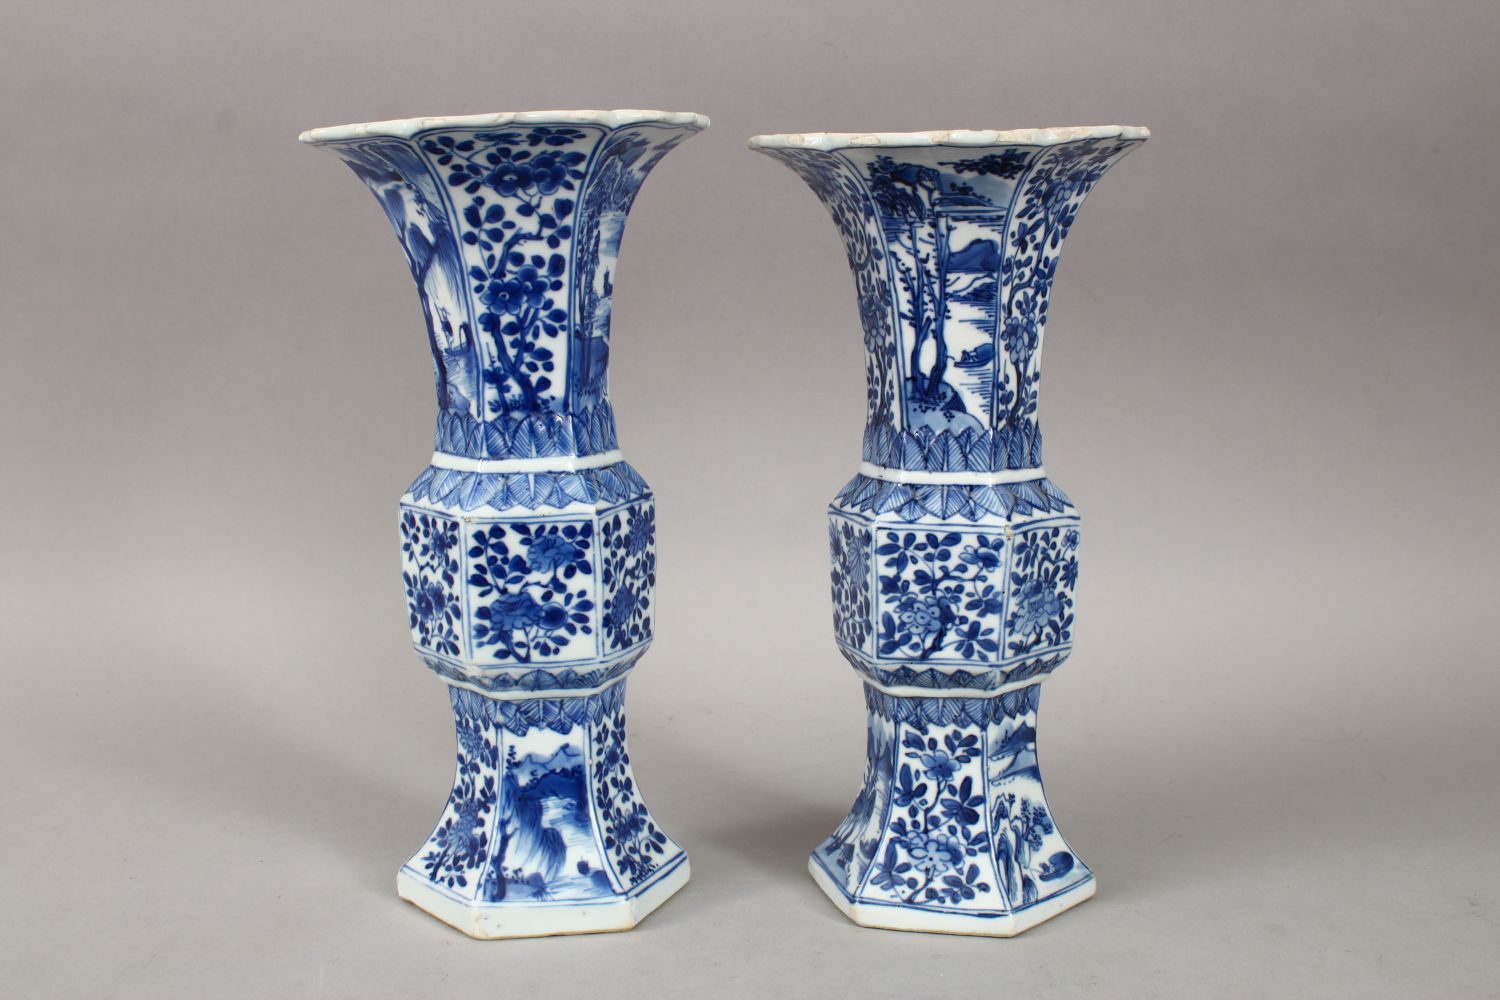 A GOOD PAIR OF 18TH CENTURY CHINESE KANGXI BLUE & WHITE GU SHAPE PORCELAIN VASES, with a multitude - Image 3 of 10